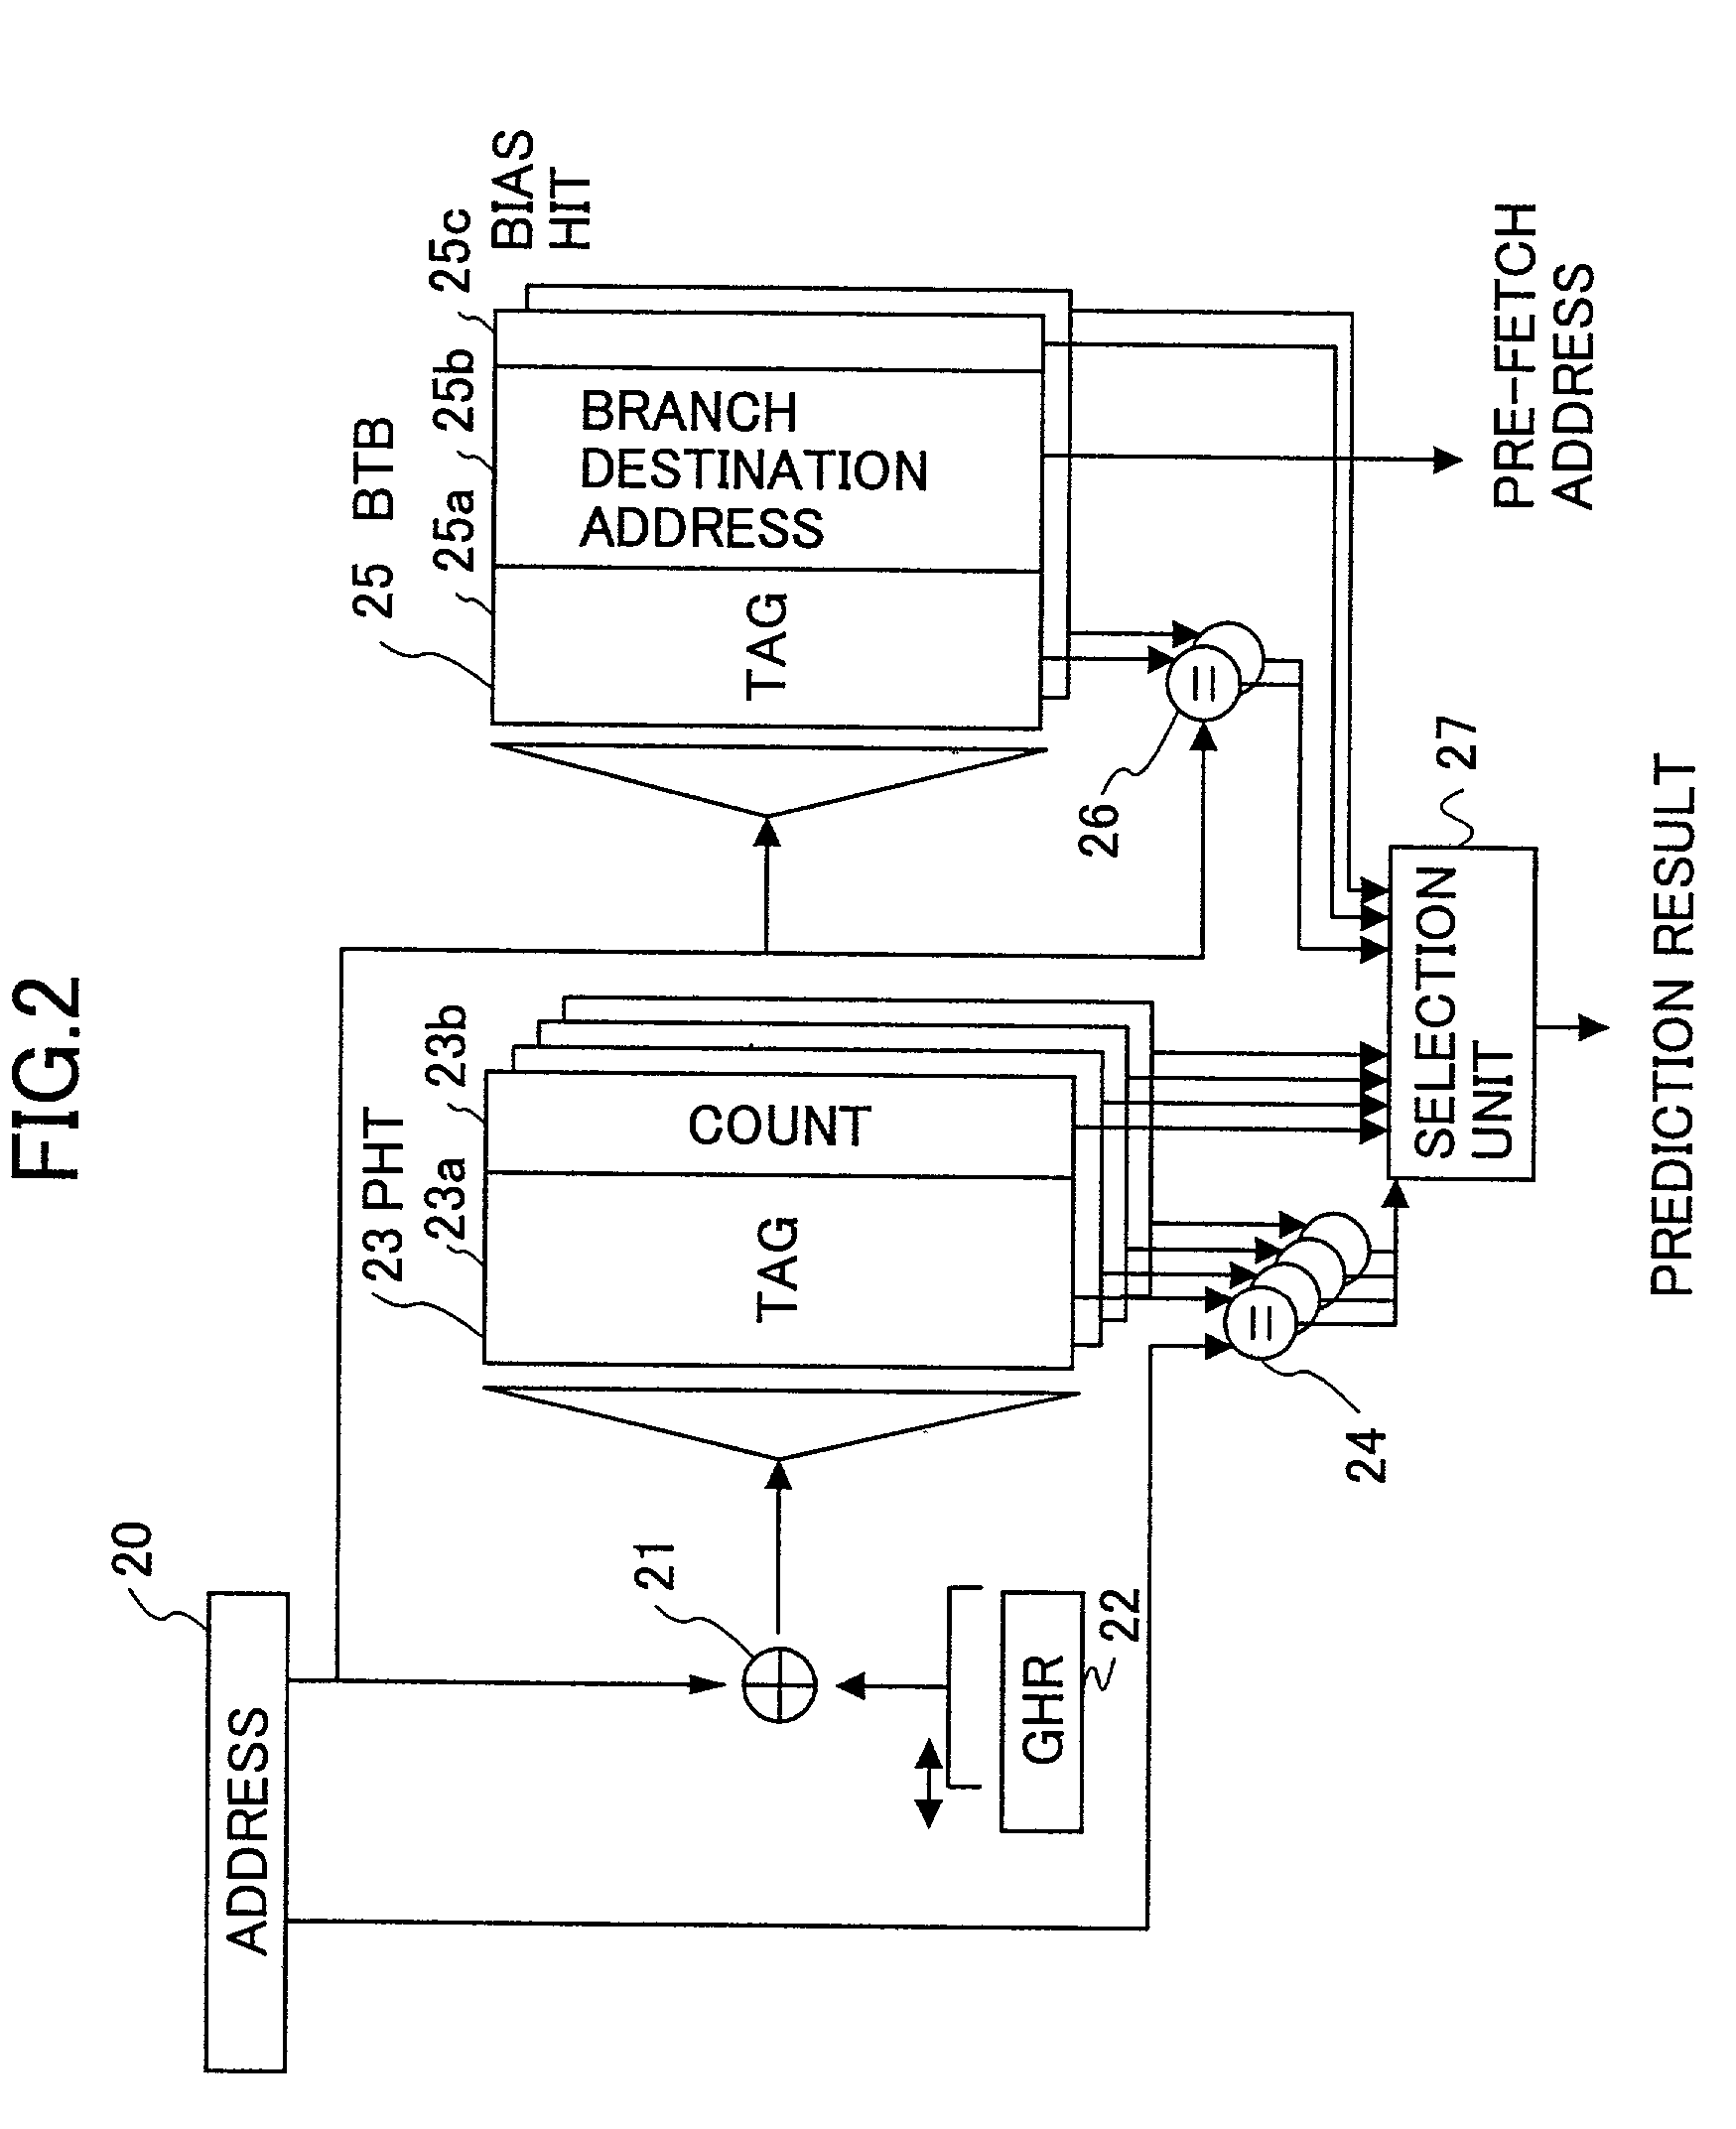 Apparatus and method for branch prediction where data for predictions is selected from a count in a branch history table or a bias in a branch target buffer